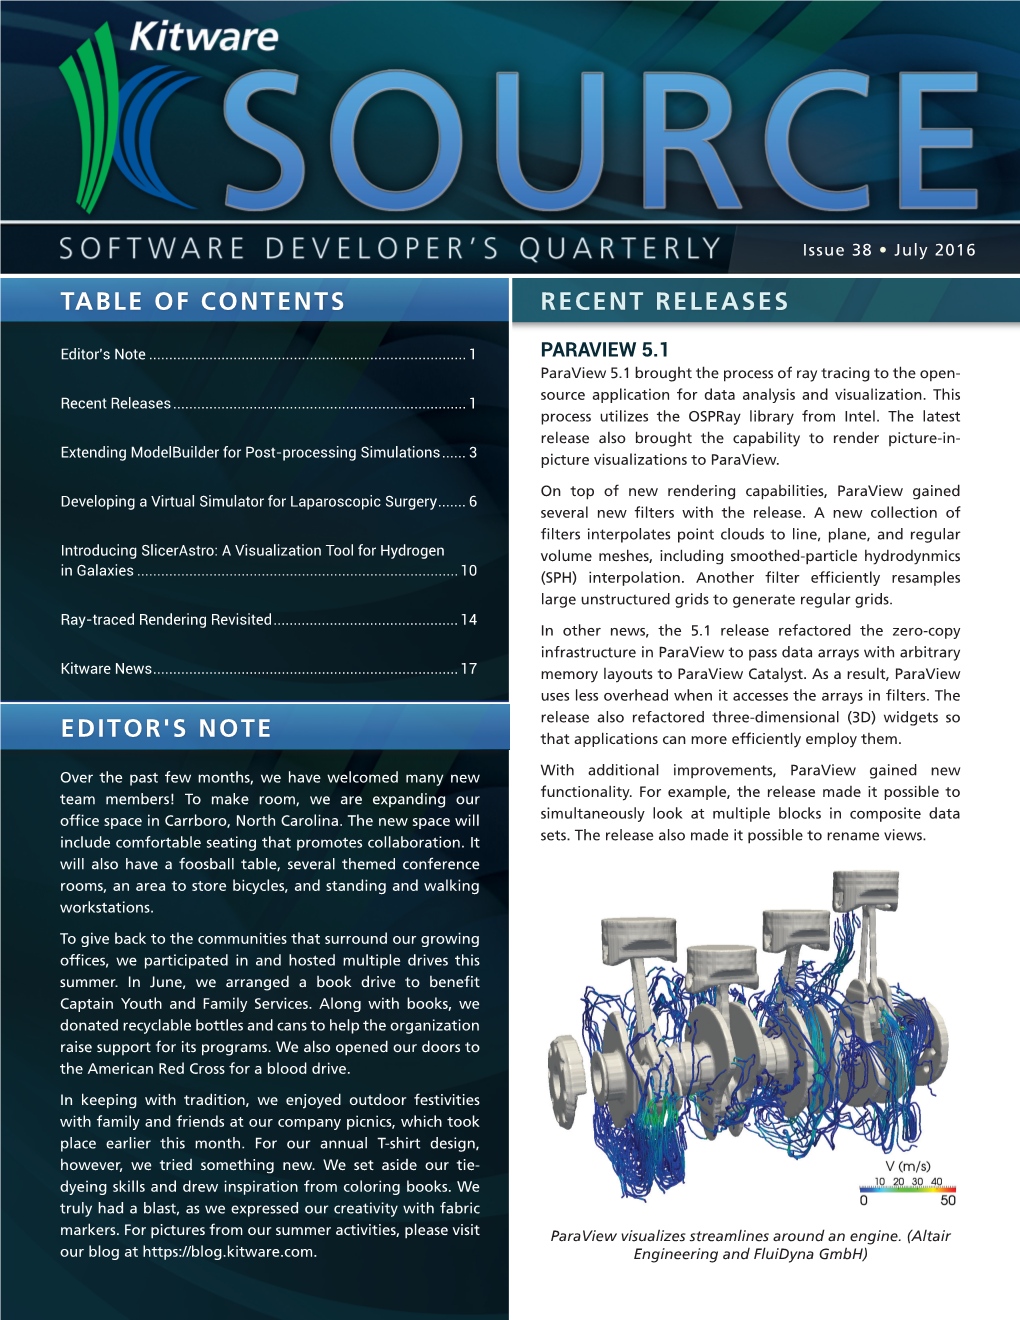 Kitware Source Issue 38